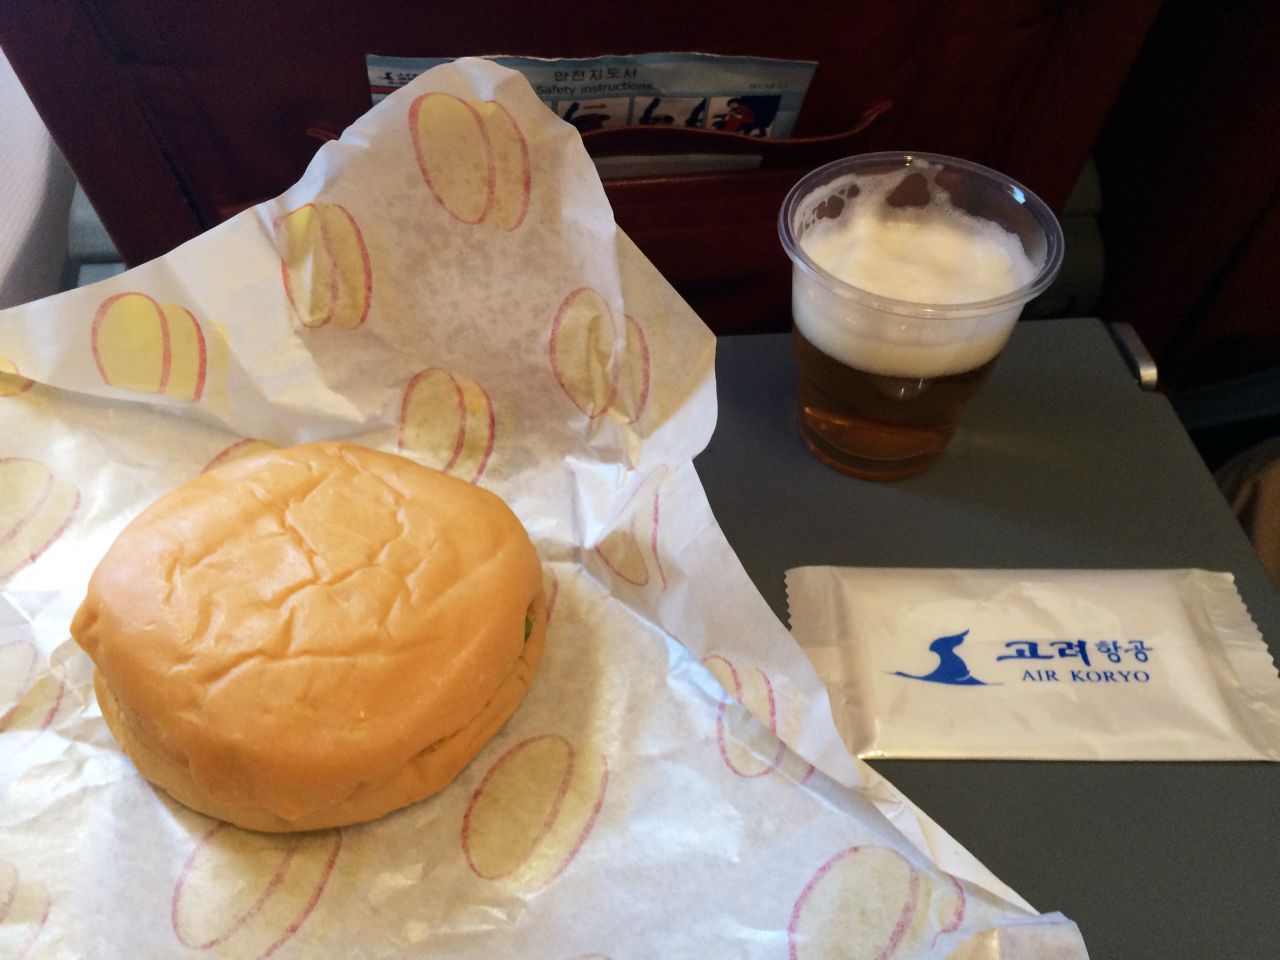 The inflight meal consists of a burger and a glass of North Korean beer.  